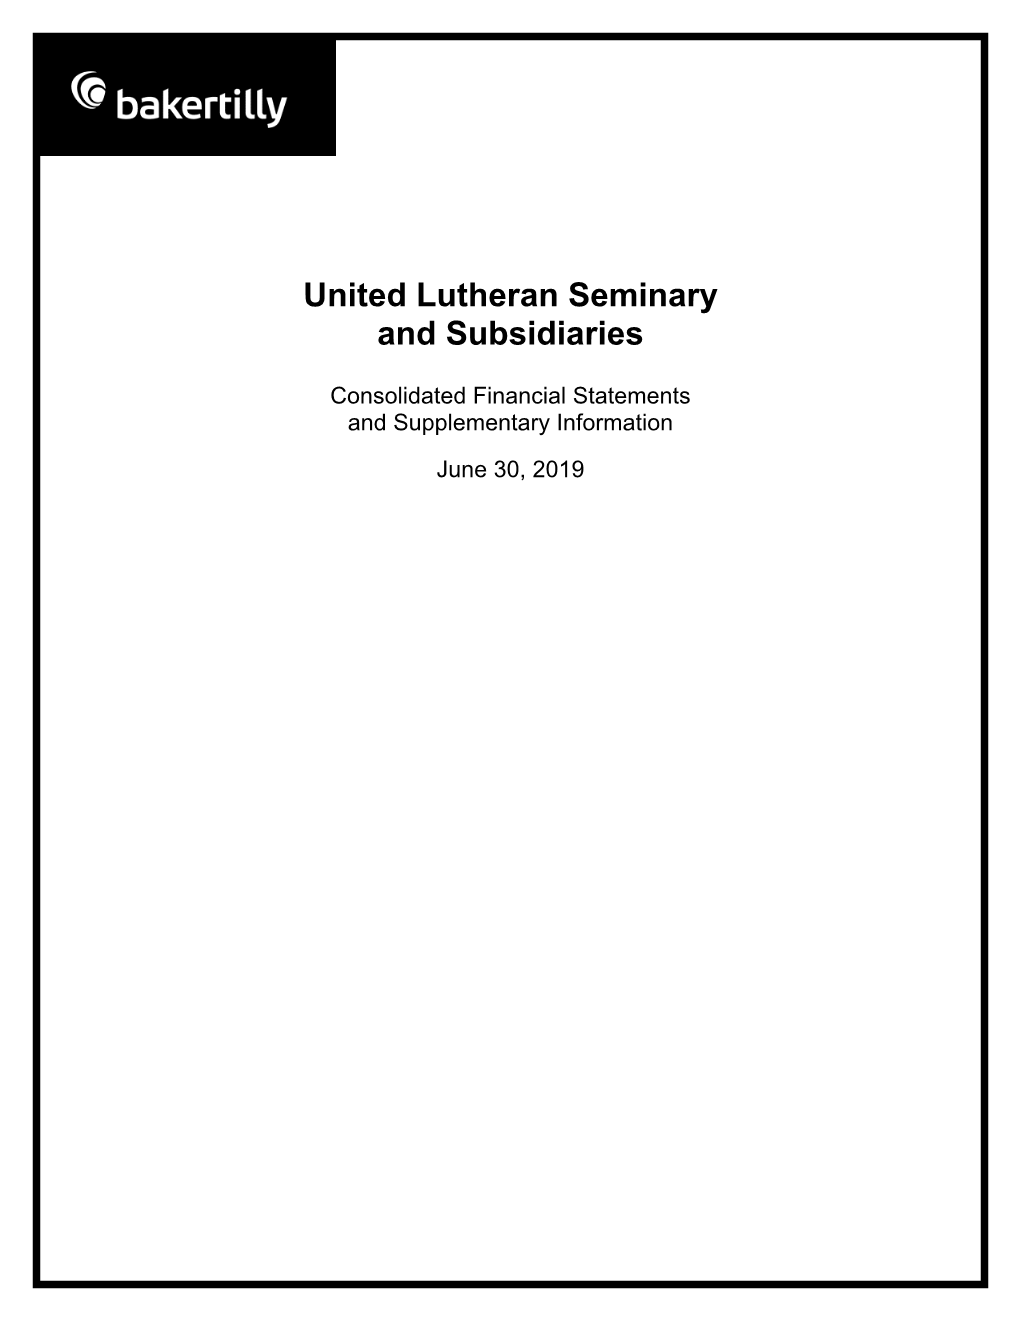 United Lutheran Seminary and Subsidiaries